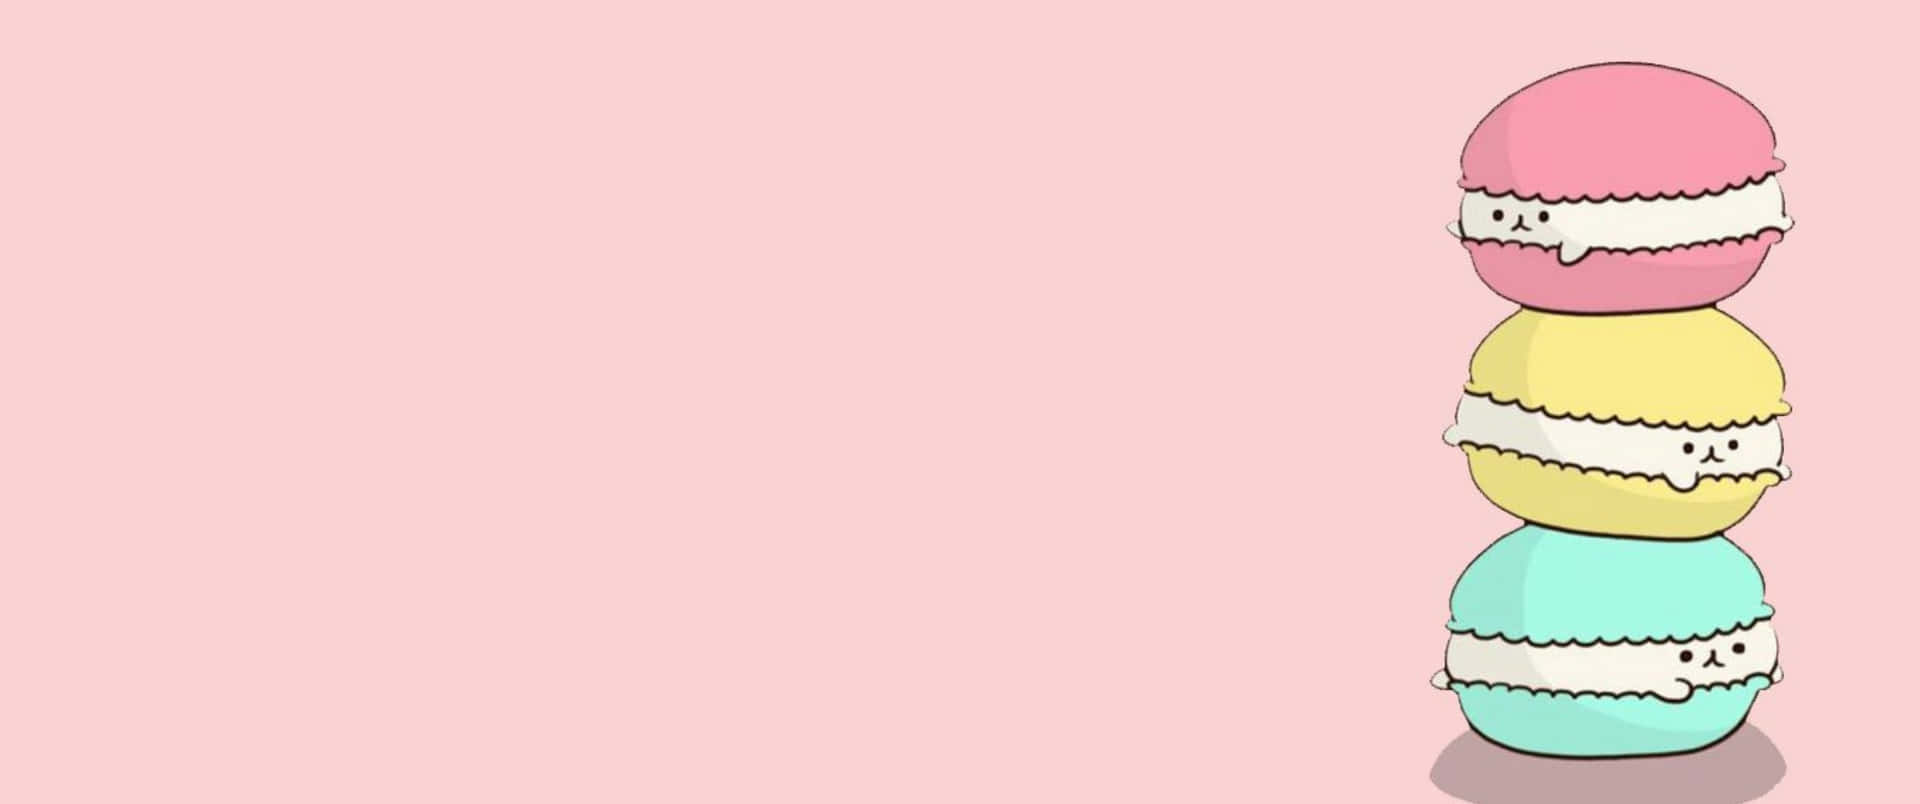 A cute pink background filled with a vibrant energy